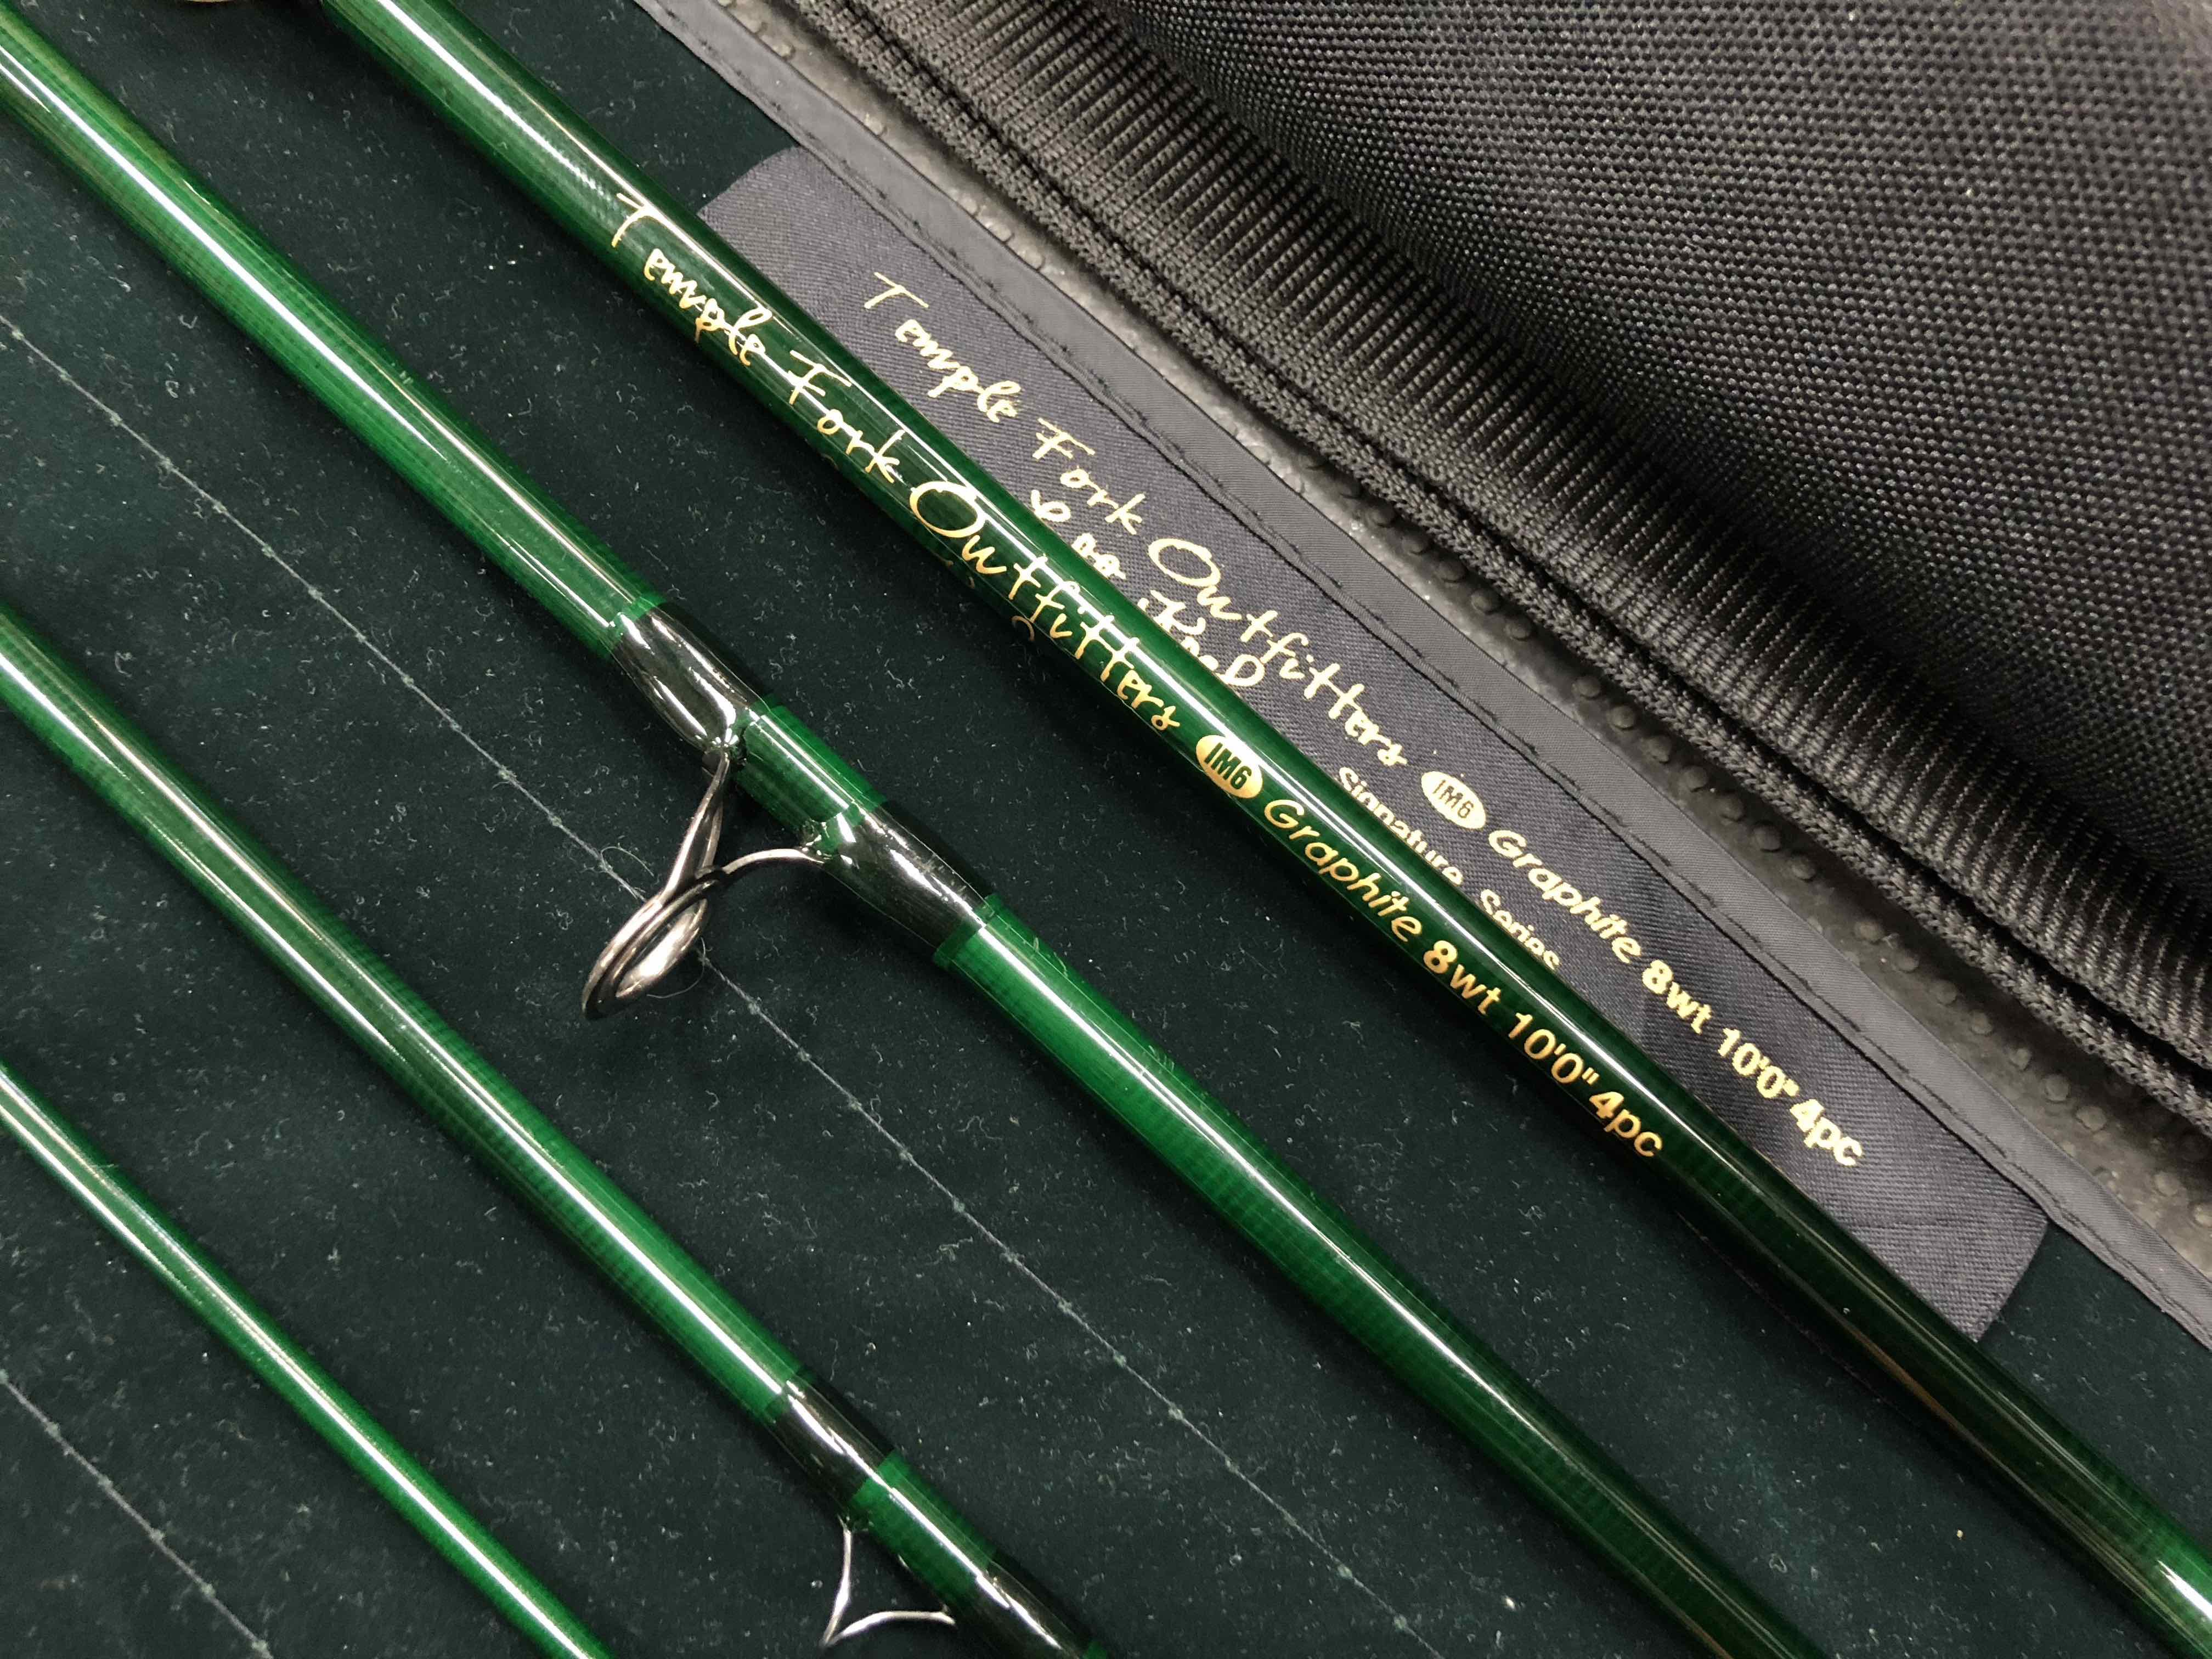 TFO Temple Fork Outfitters Fly Rod - Lefty Kreh Signature Series - 10’ 8wt 4pc c/w Rod Sock & Tube - LIKE NEW! - $150